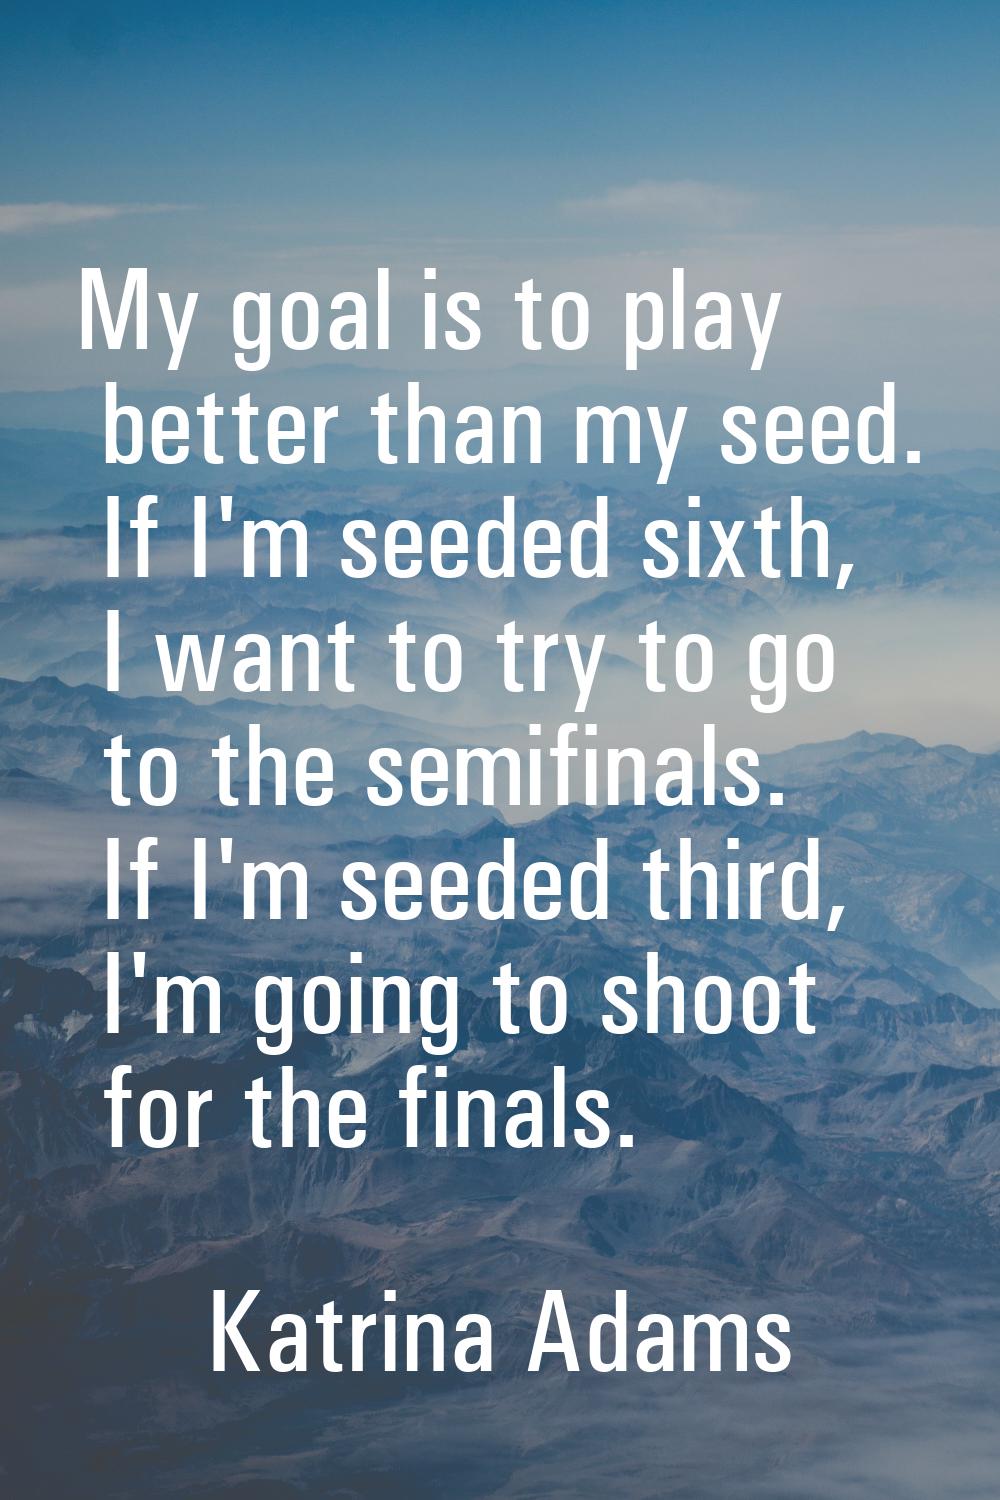 My goal is to play better than my seed. If I'm seeded sixth, I want to try to go to the semifinals.